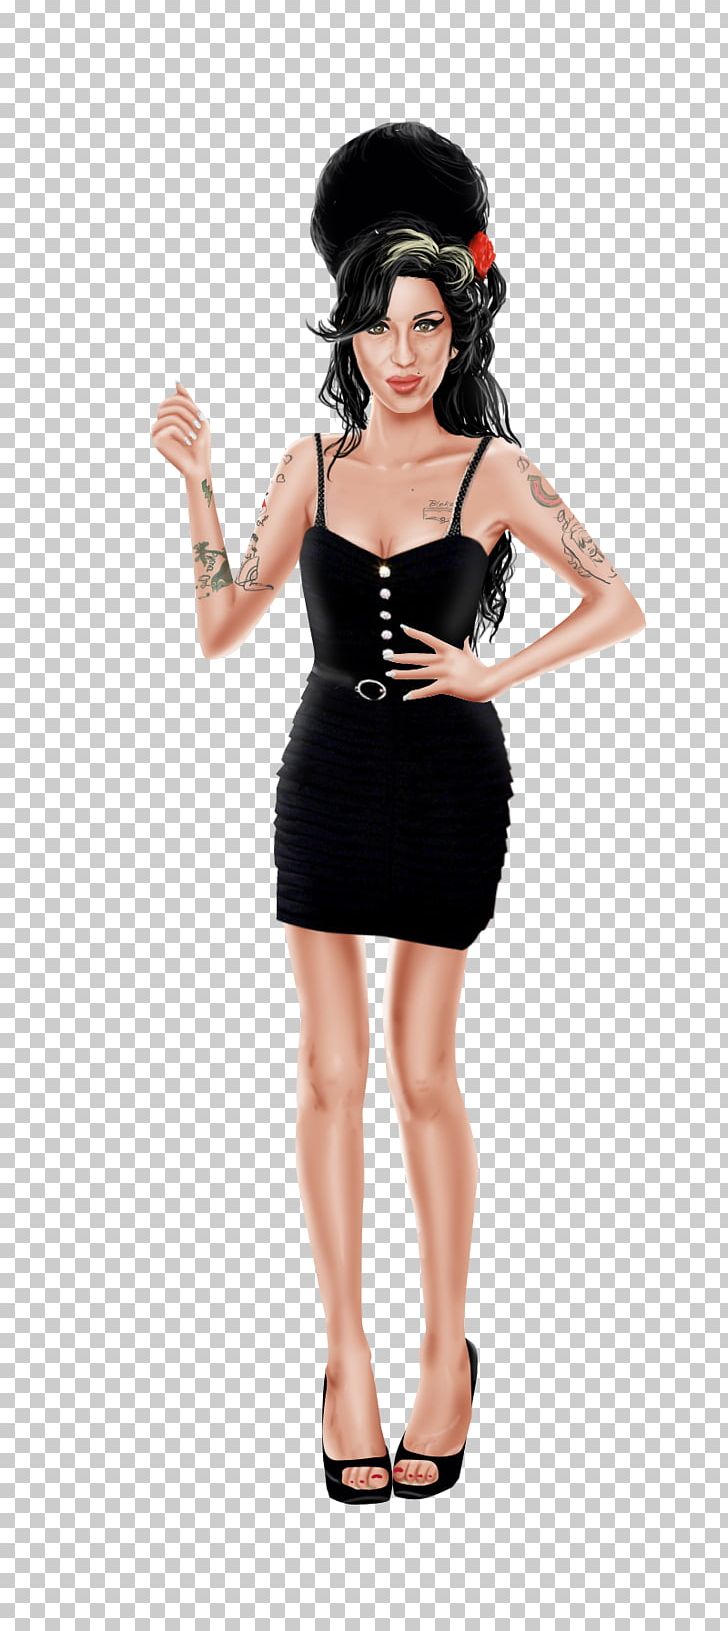 Amy Winehouse Pixel Art Musician PNG, Clipart, Amy Winehouse, Artist, Black Hair, Clothing, Cocktail Dress Free PNG Download